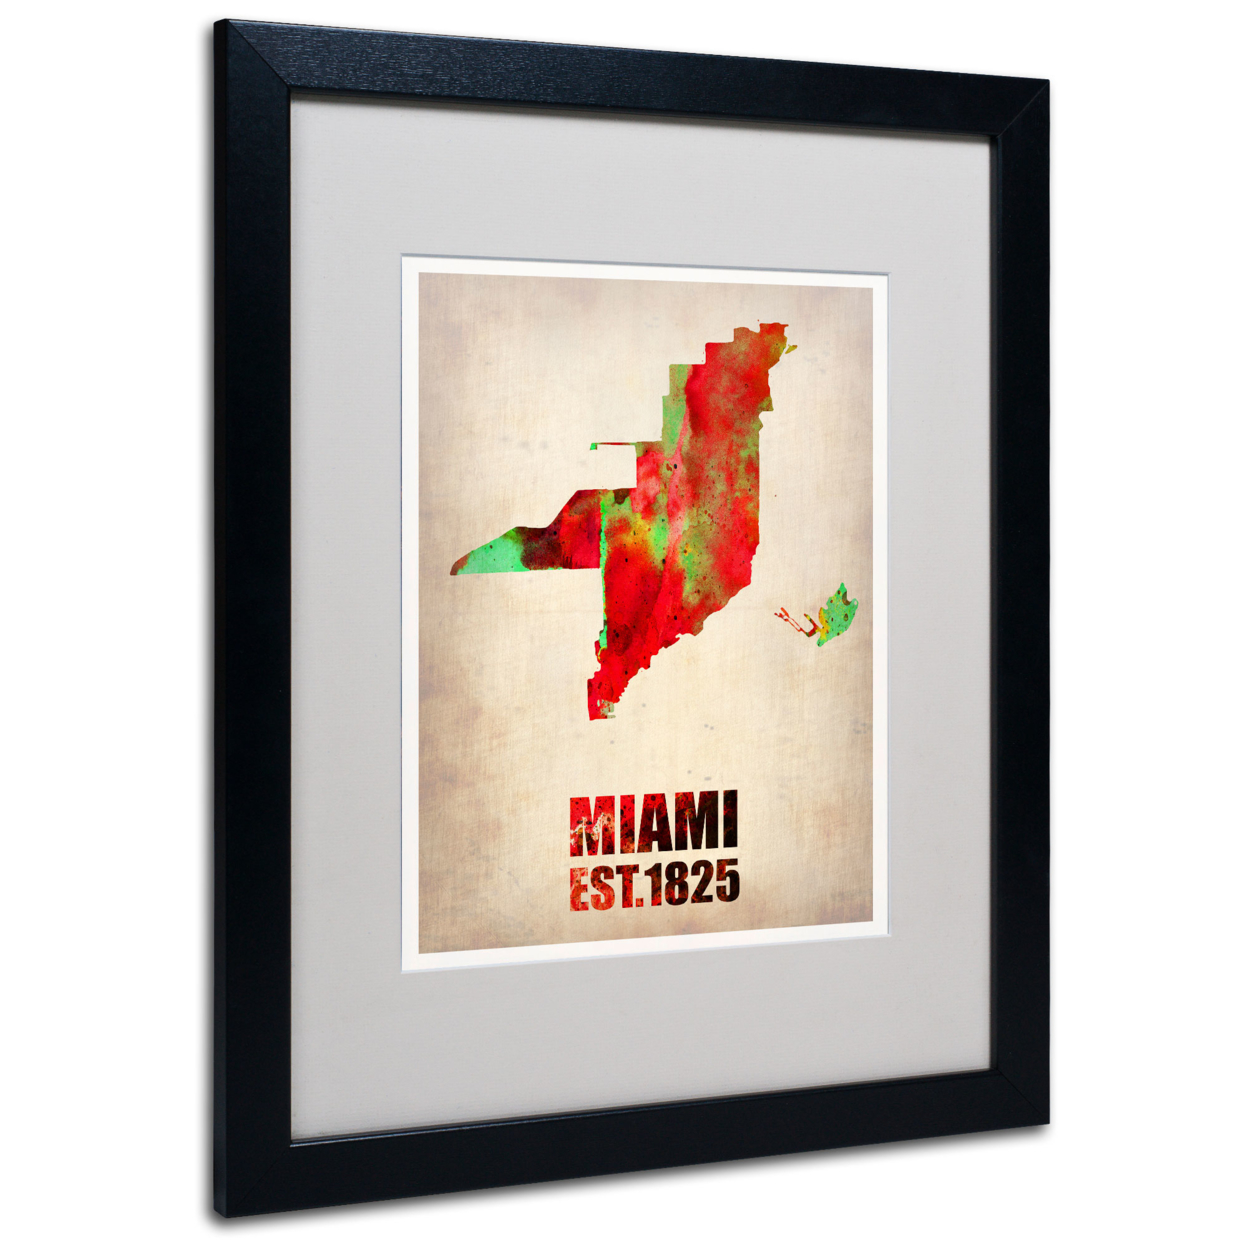 Naxart 'Miami Watercolor Map' Black Wooden Framed Art 18 X 22 Inches